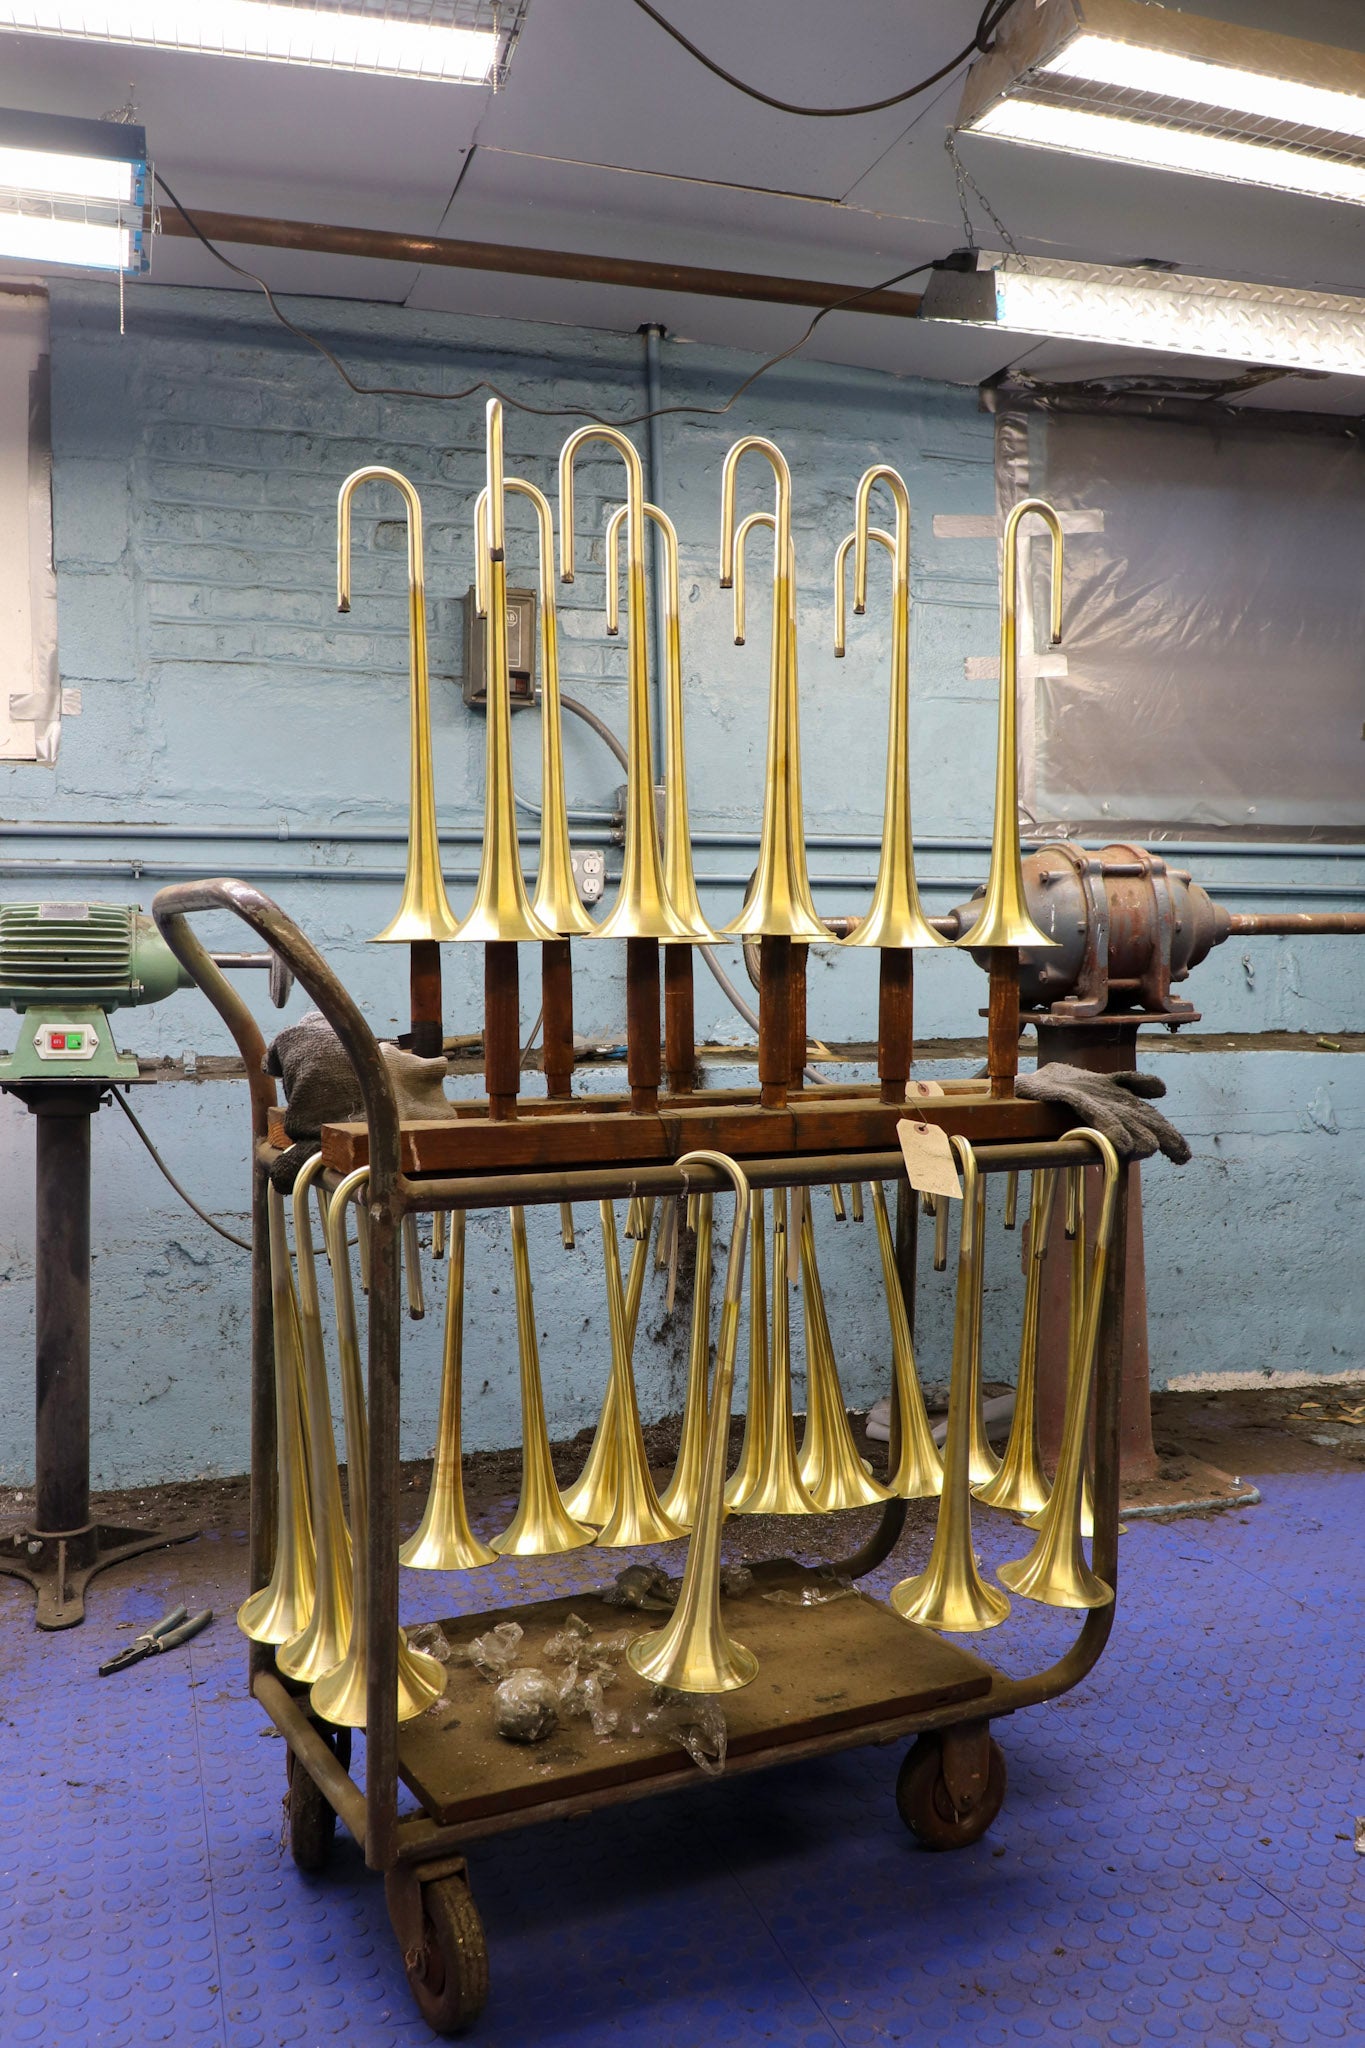 Cart of bent and sanded trumpet bells